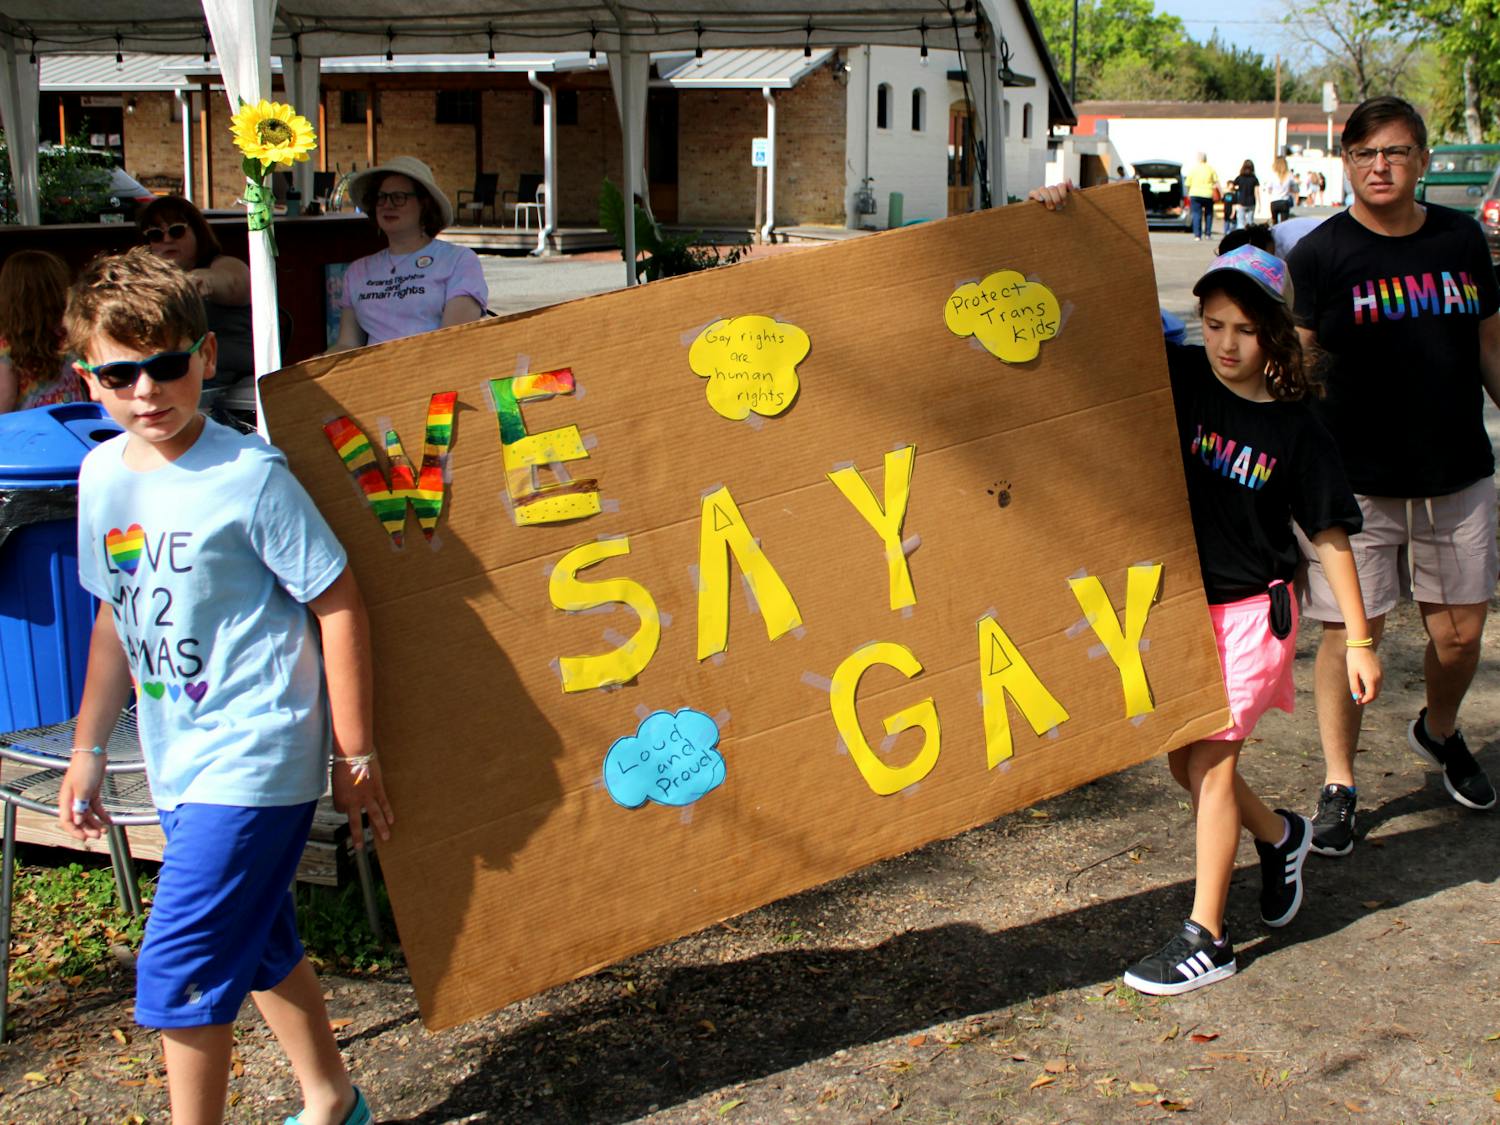 Becky Fields, a teacher at Talbot Elementary School, and Fields' two children hold a "We Say Gay" sign to protest Florida's Don't Say Gay bill at Heartwood Soundstage on Saturday, March 19. The bill has passed the state legislature and is on the governor's desk.